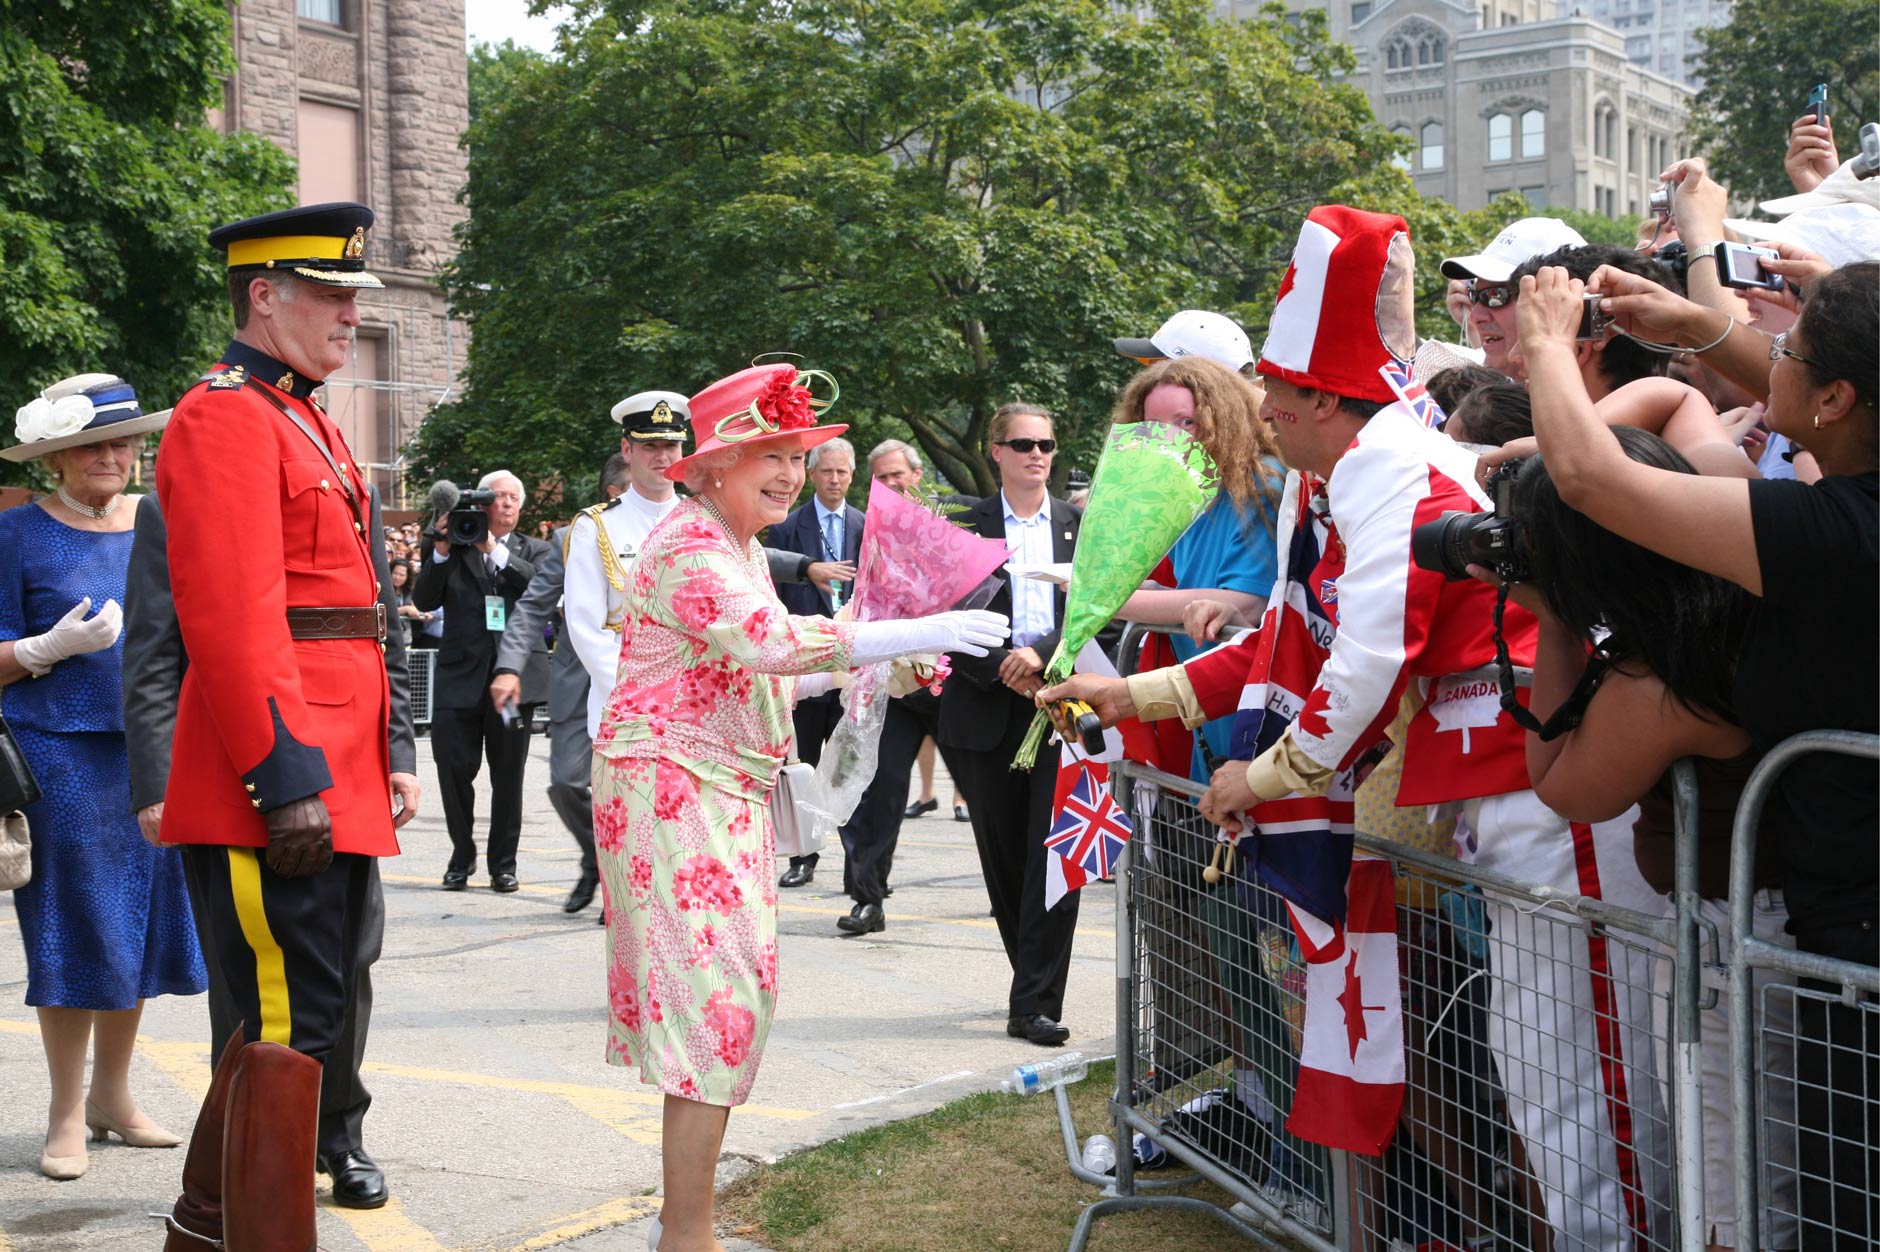 Her Majesty Queen Elizabeth II is greeted with enthusiasm by onlookers during the 2010 Royal Visit.